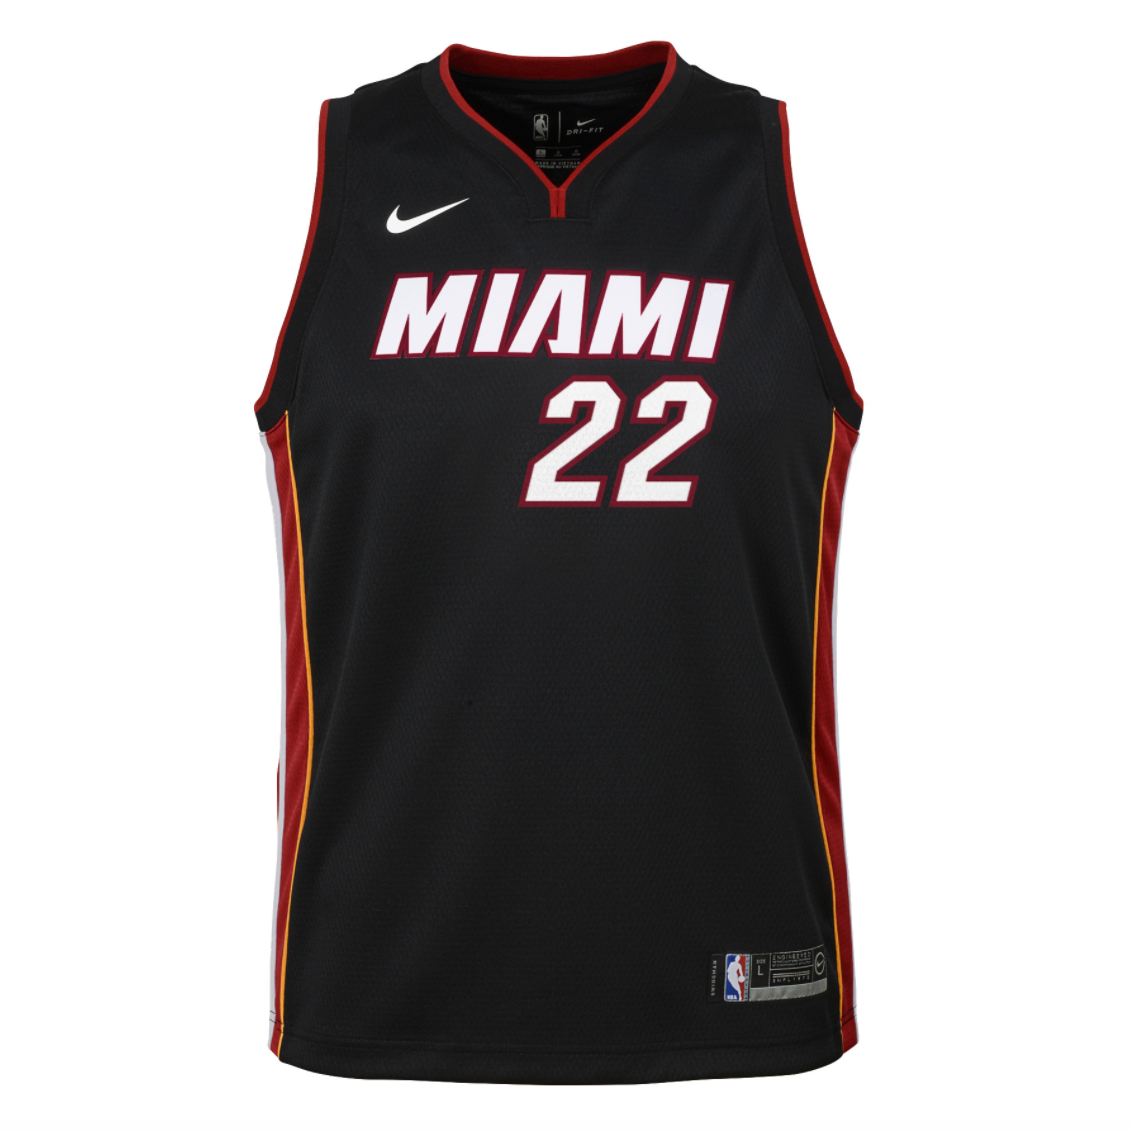 Youth (S-XL) – Tagged jimmy-butler – Miami HEAT Store